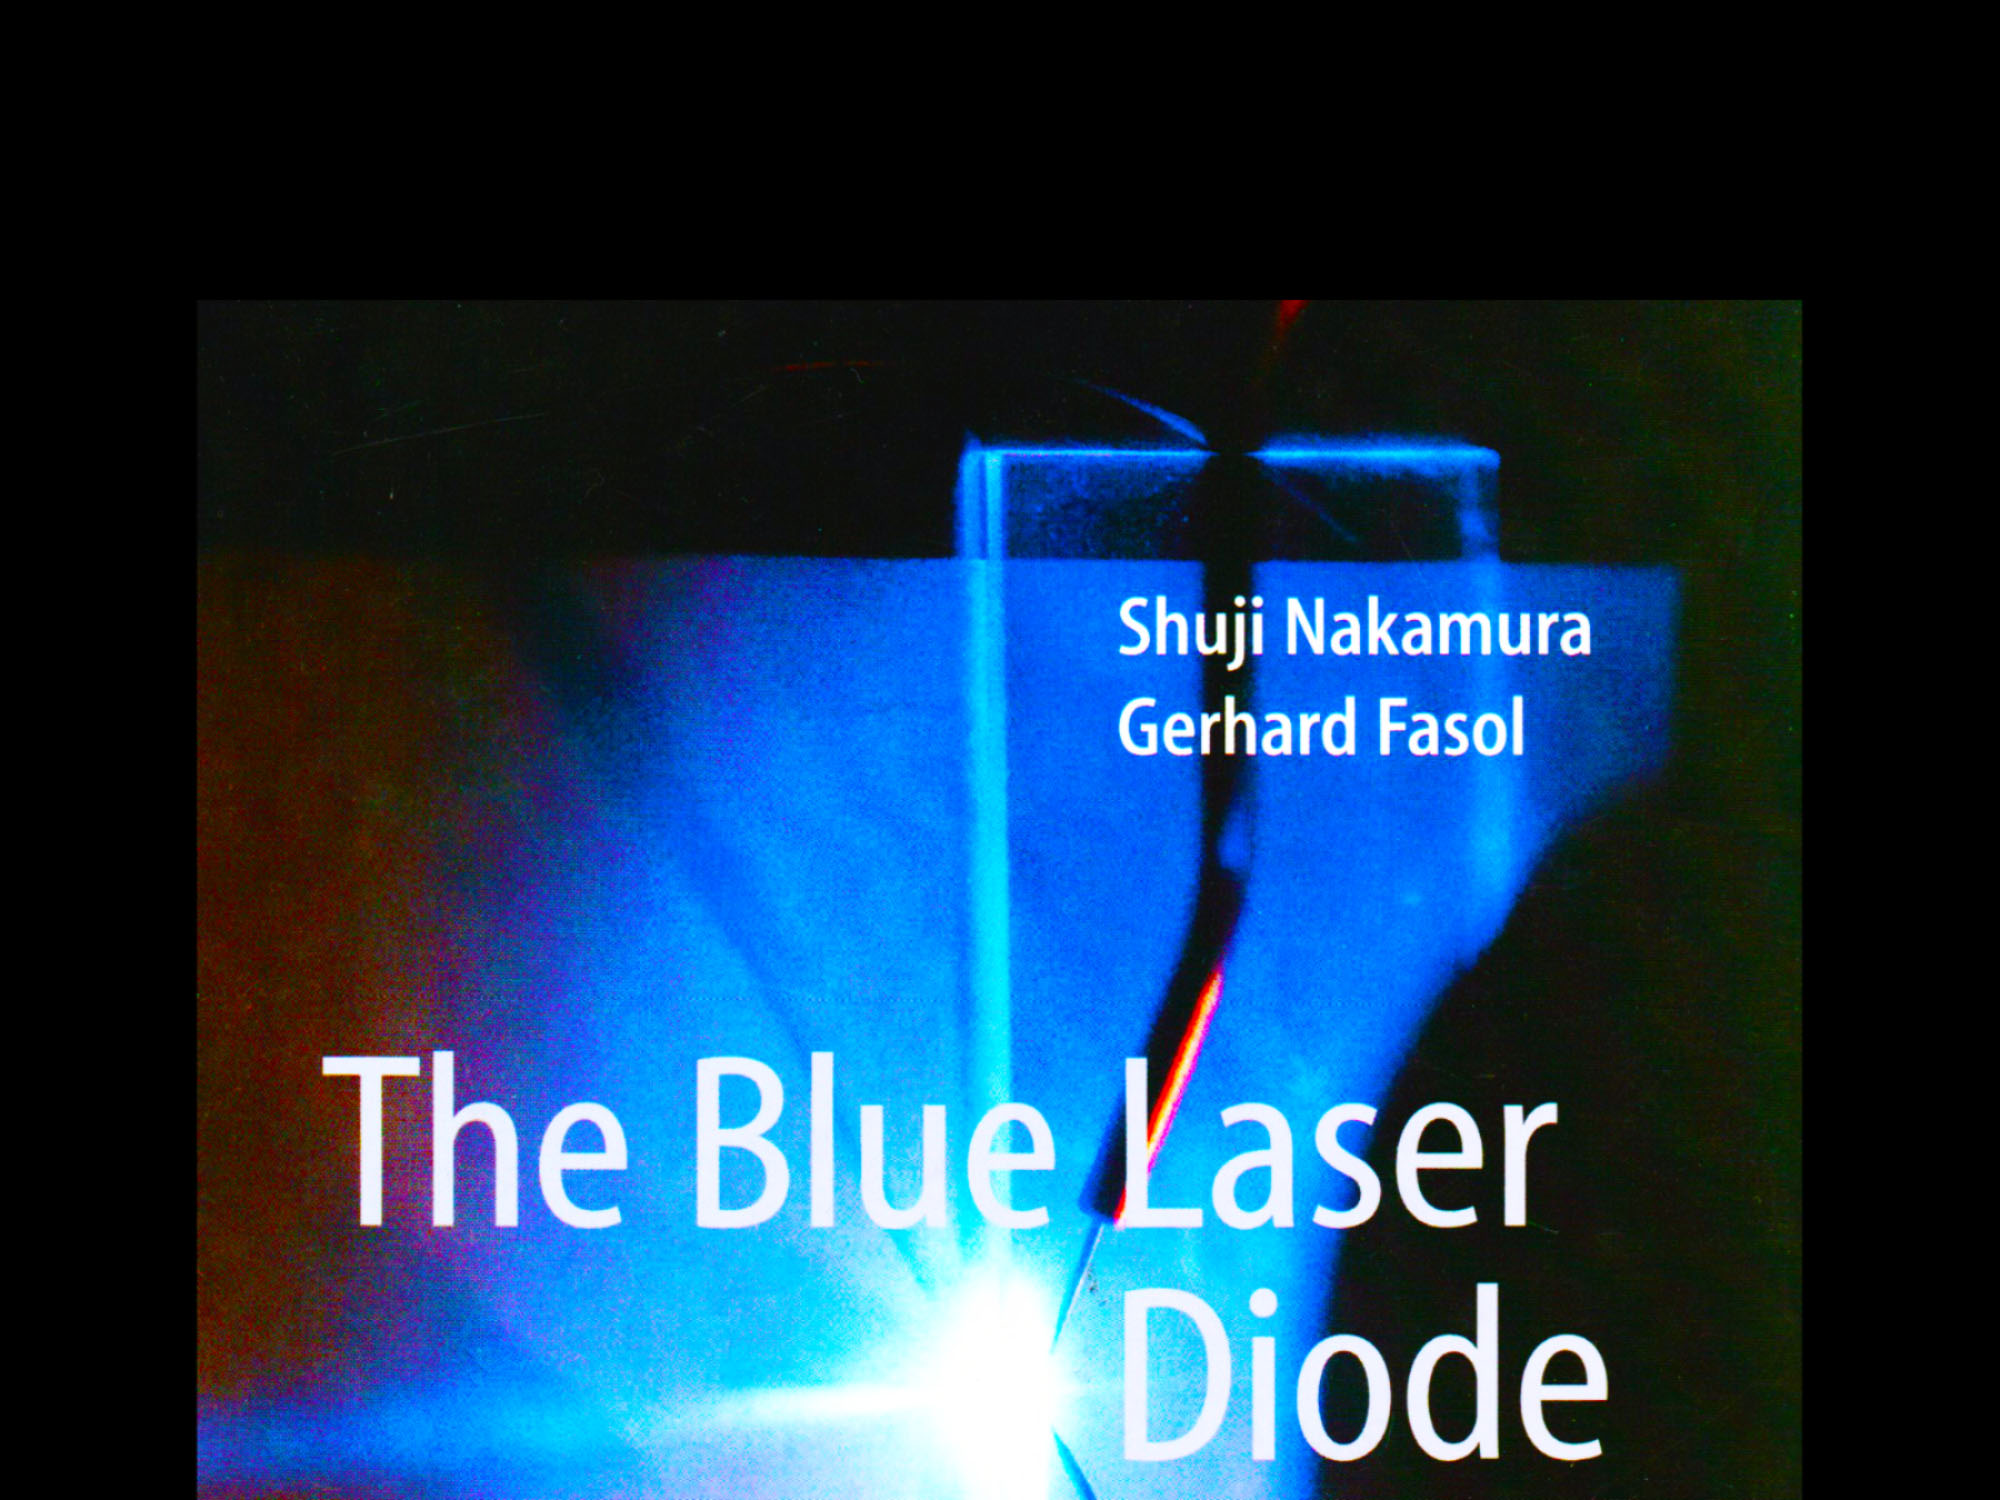 Blue laser diode book with Shuji Nakamura – the back ground story